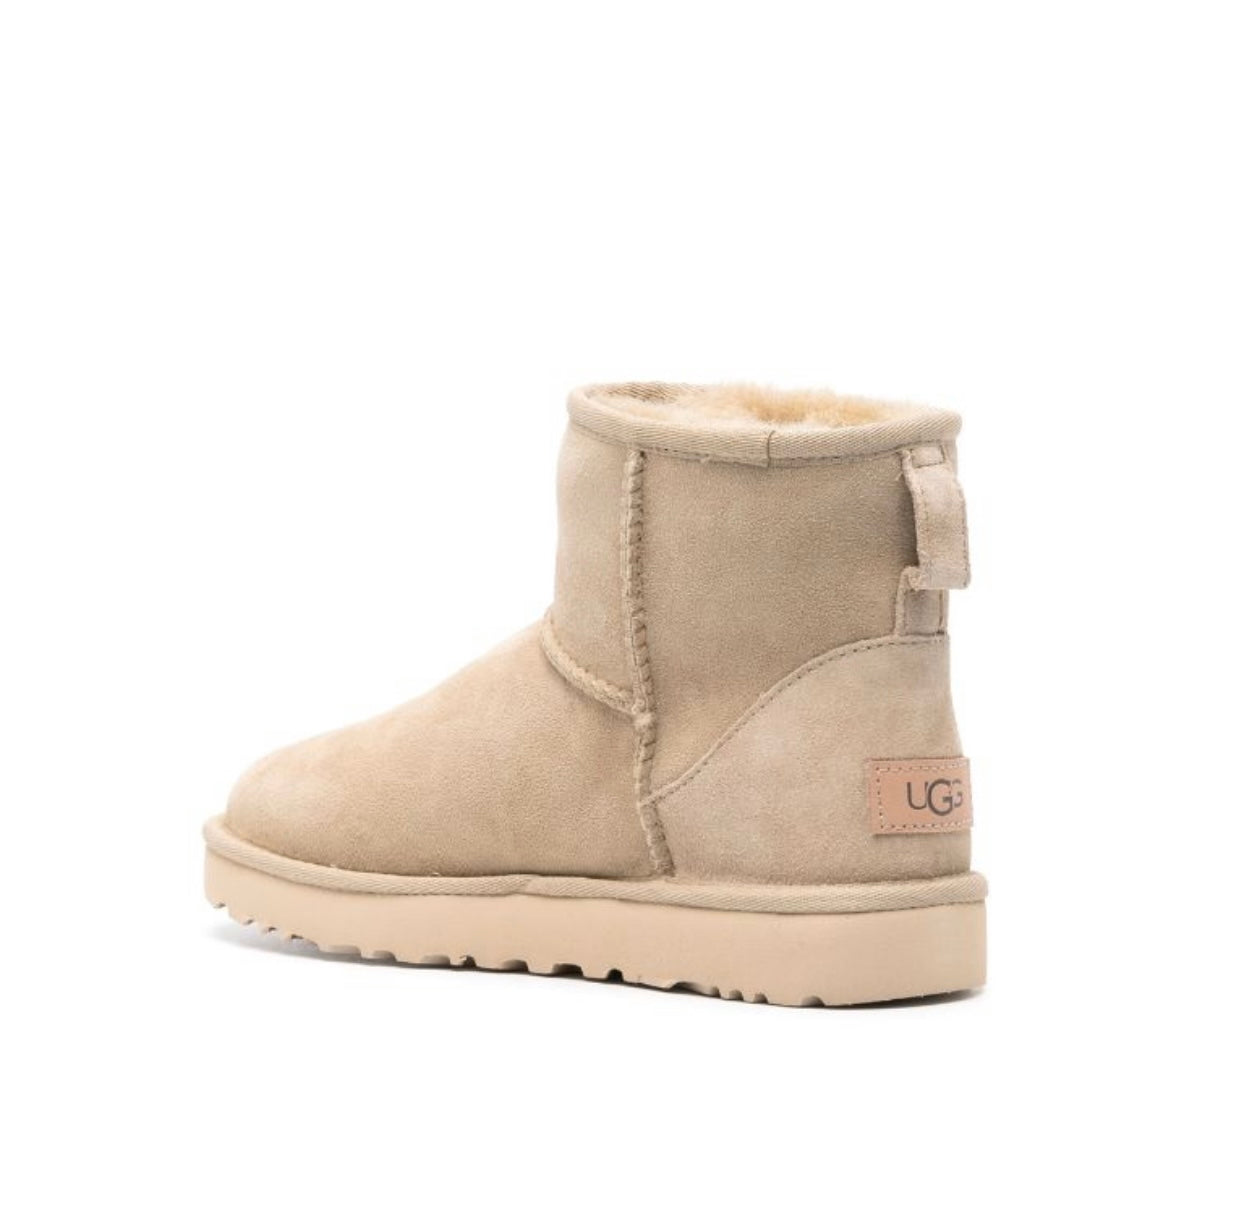 Ugg classic ankle boots cream